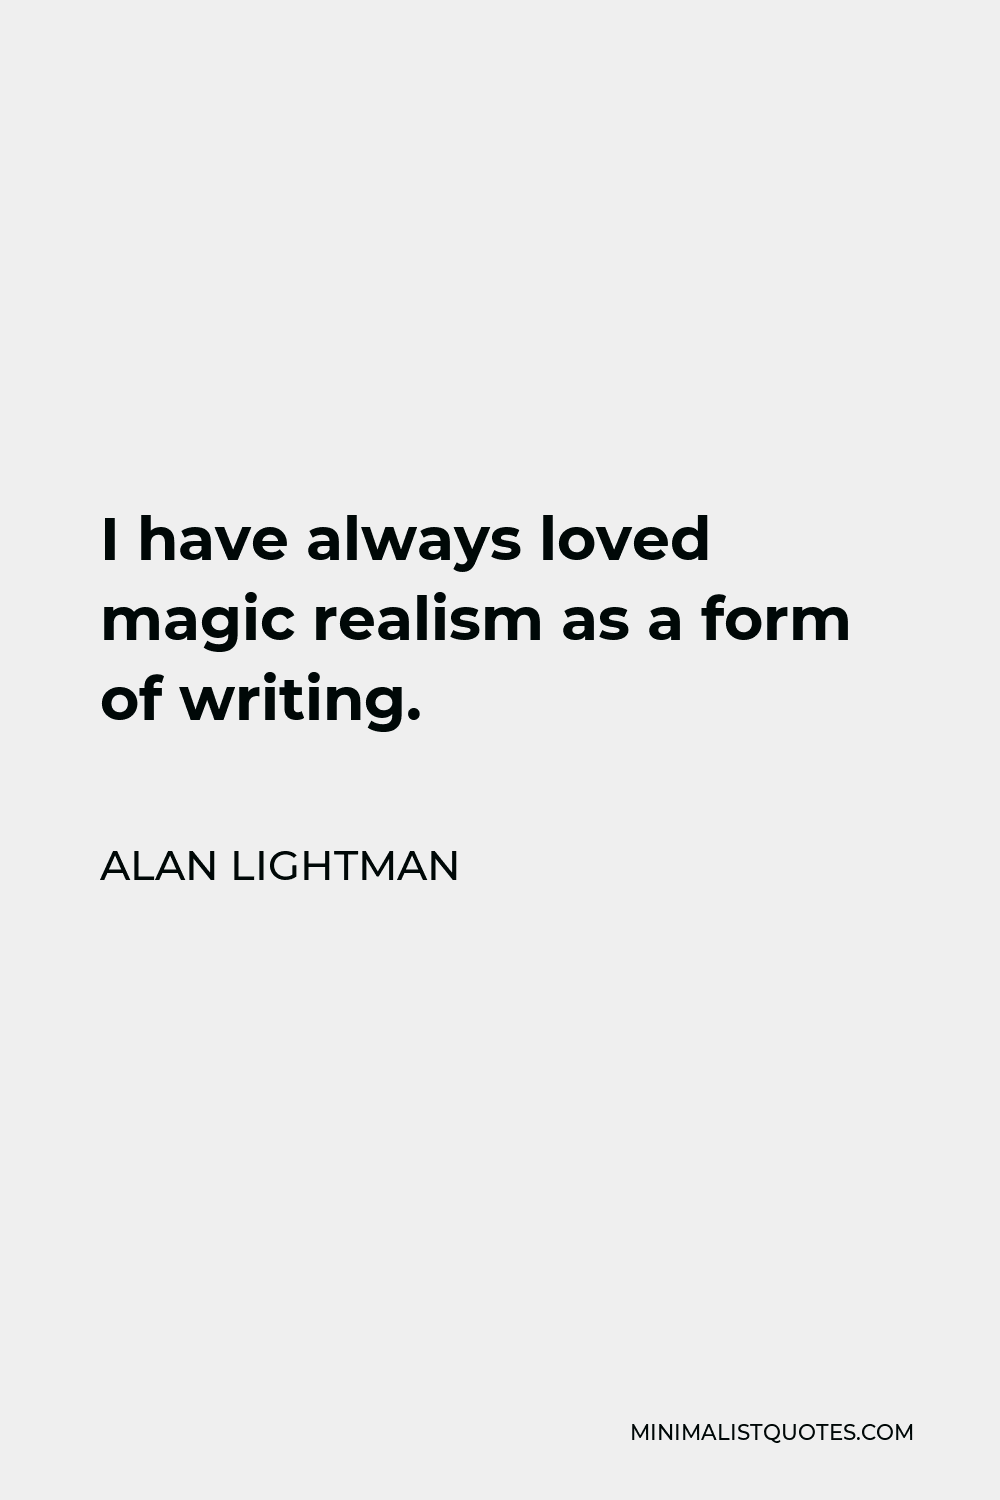 Alan Lightman Quote - I have always loved magic realism as a form of writing.